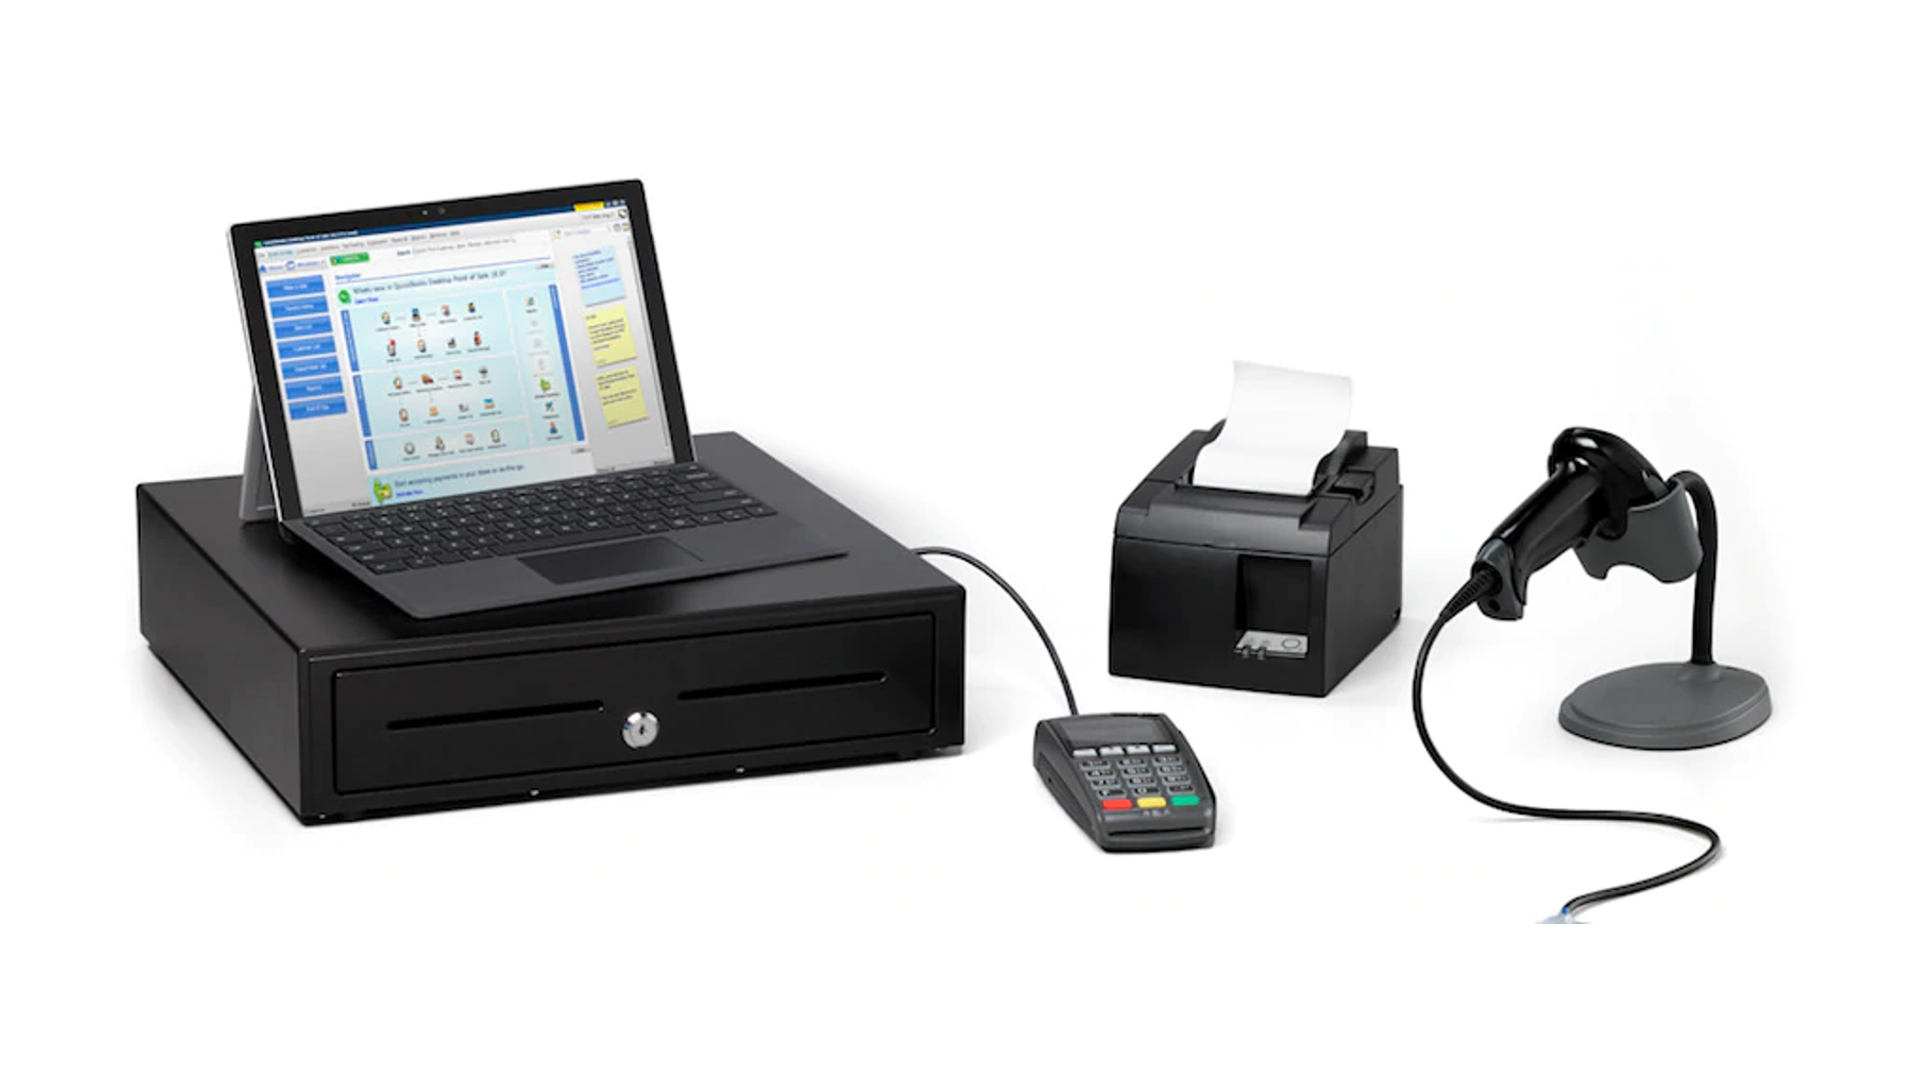 intuit pos software